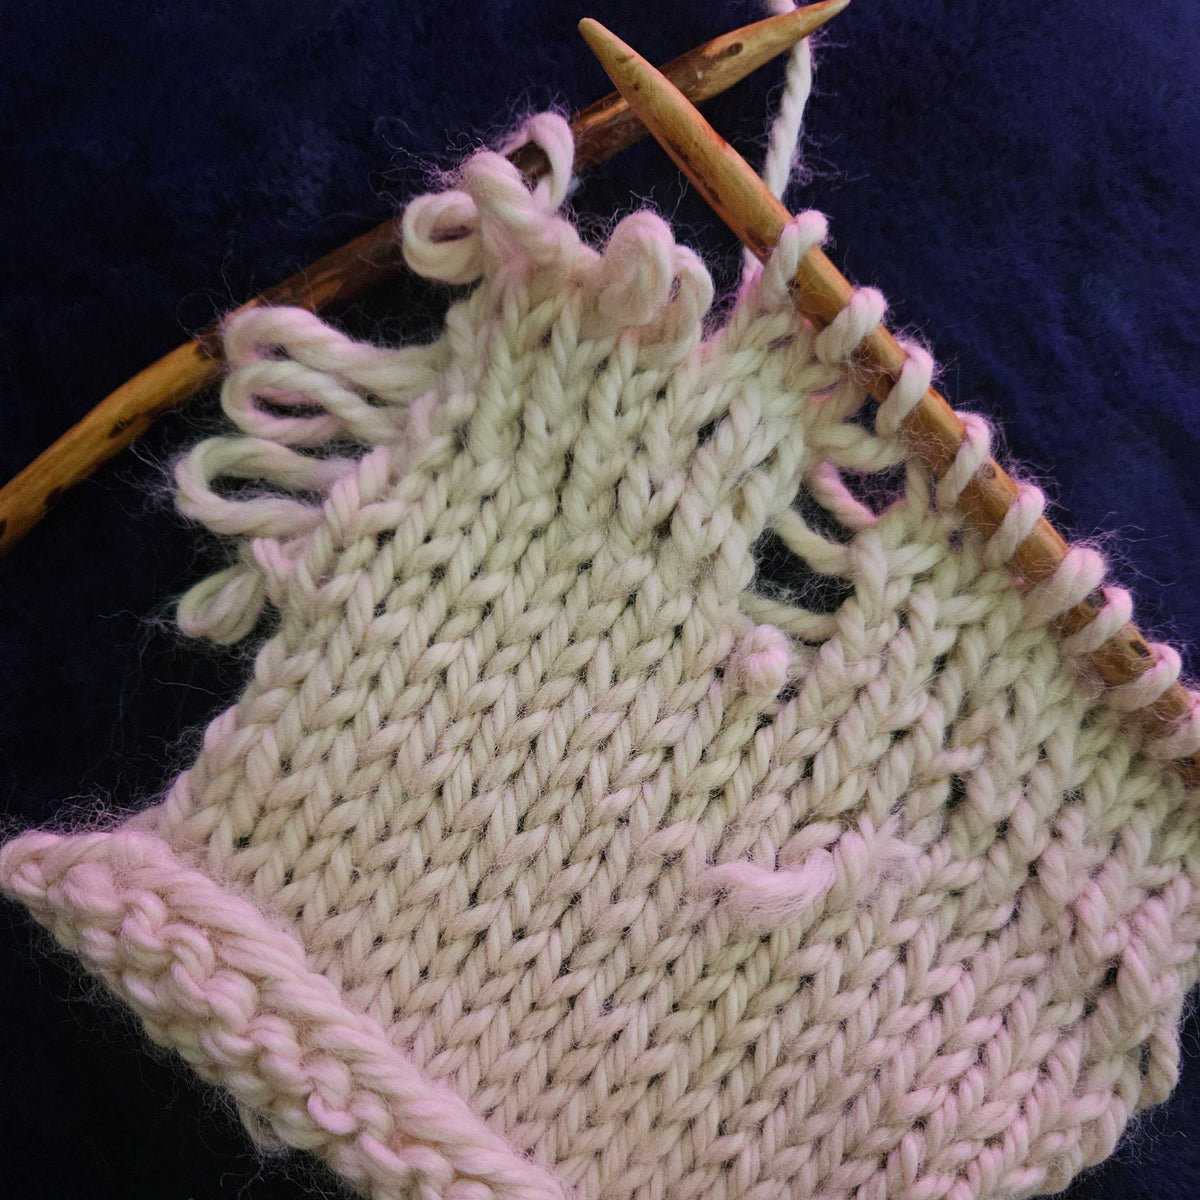 Class: Knitting 104 - Correcting Mistakes for Beginners